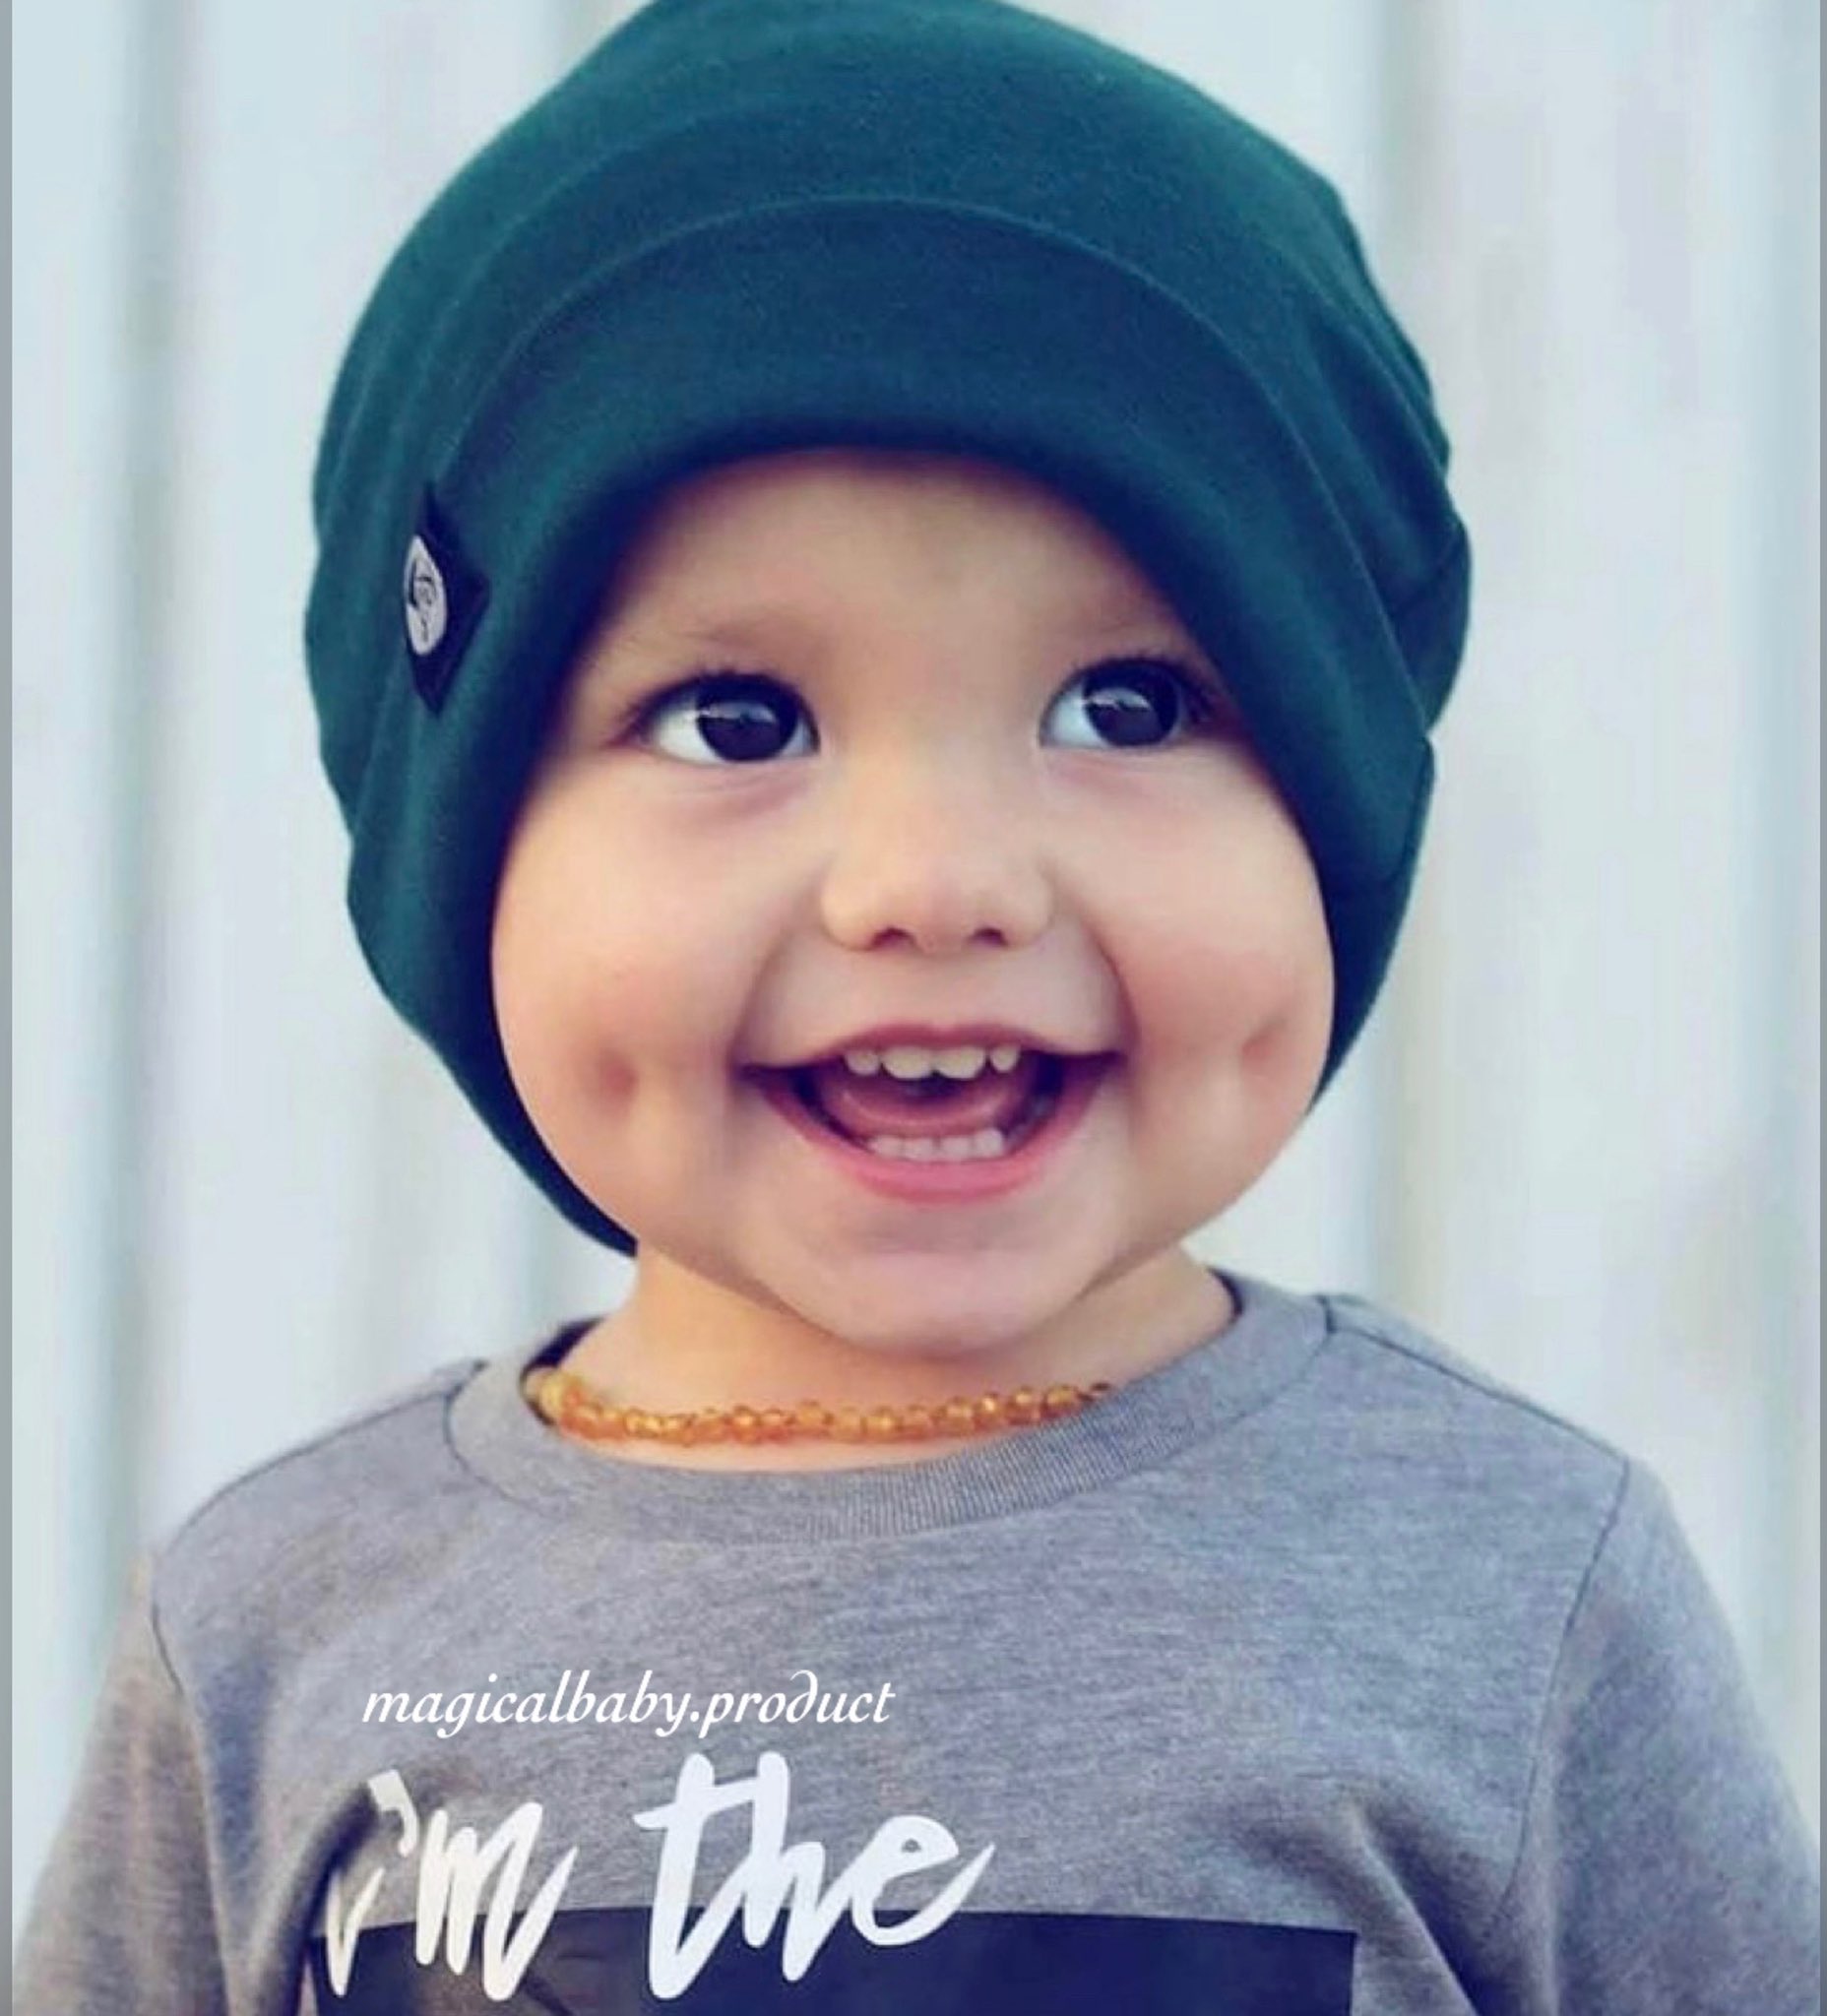 Magical baby product on X: "DIMPLES makes everyone absolutely adorable #magicalbabypro1 #magicalbabyproduct #baby #babyboy #babysmile #babydimple #cutebaby #adorablebaby #babysmile #babyadorable #BabyNamesFor2020 #adorable #babies #smile #haveagreatday ...